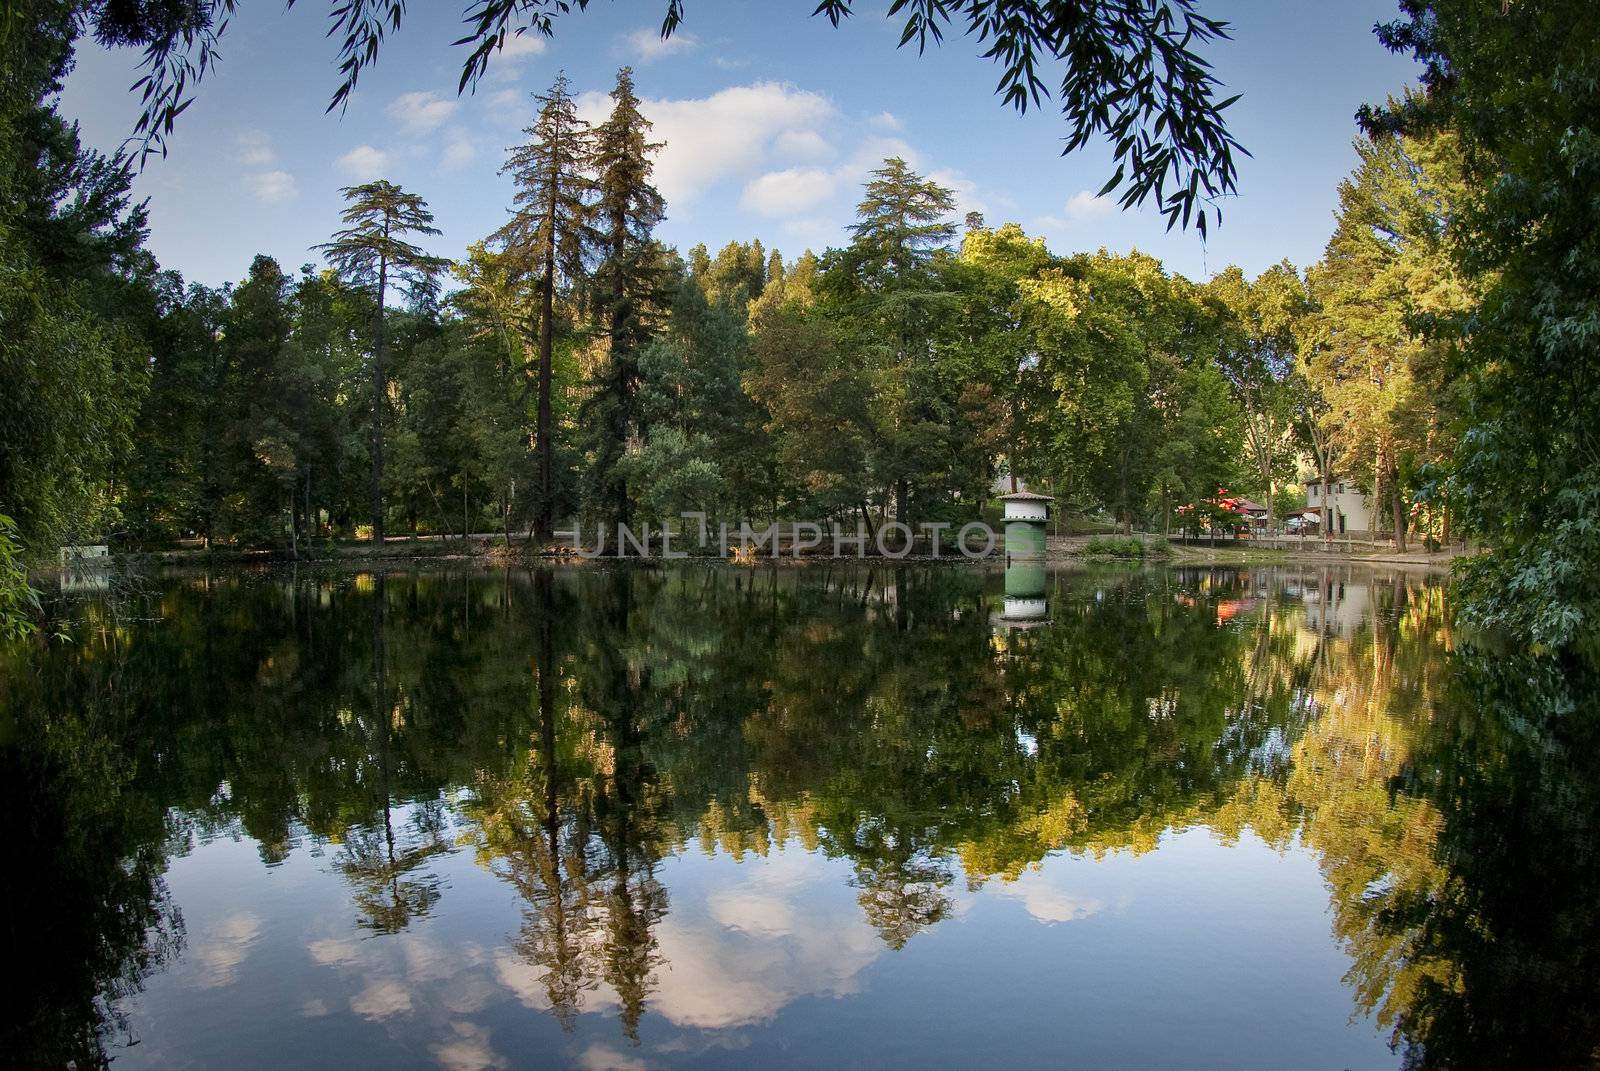 A park lake with giant trees reflected on the water.